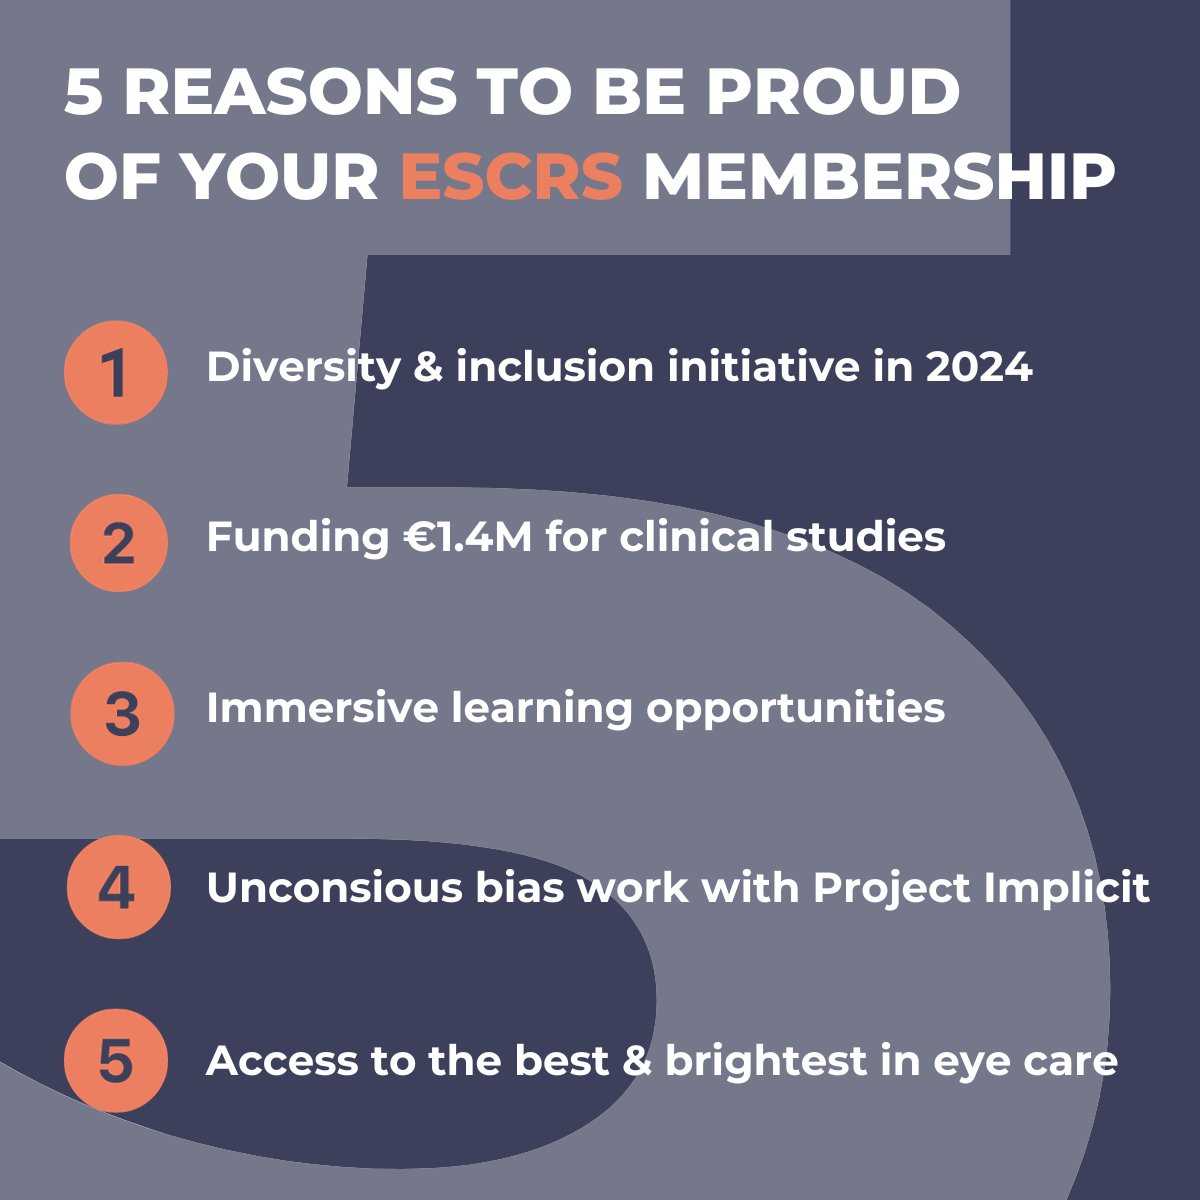 Calling all @ESCRSofficial members... you can feel proud. Listen to our interview with Dr. Filomena Ribeiro to hear more: rb.gy/ry9uci #escrs #businessofeyeinnovationpodcast #ophthalmology #ophthalmologist #innovation #diversity #inclusion #clinicalstudies #eyecare